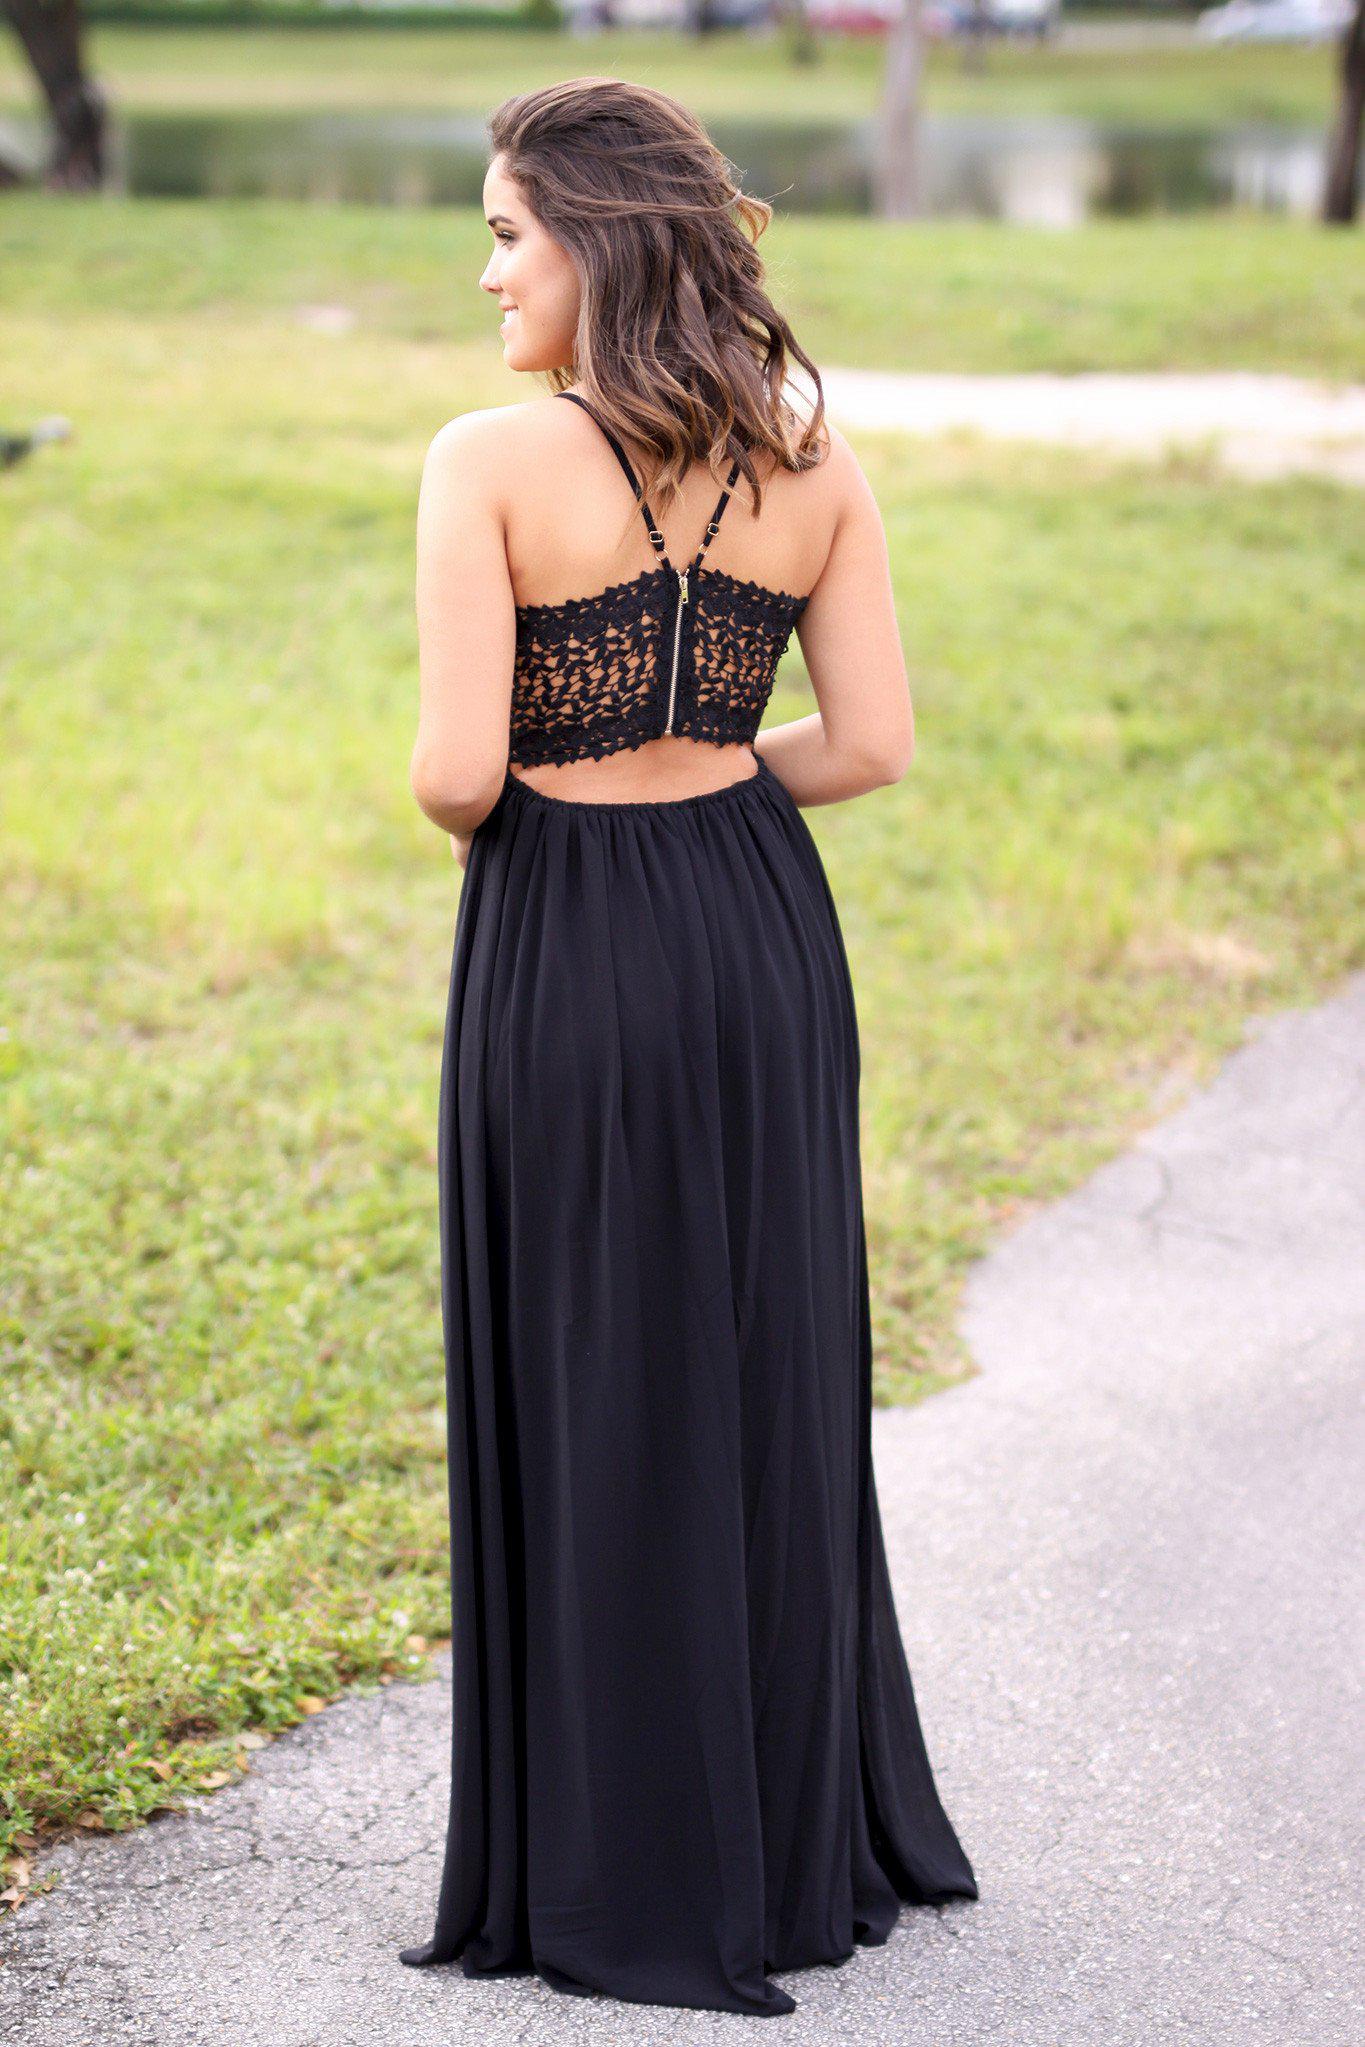 Black and Gold Maxi Dress with Crochet Back | Black Evening Gown ...